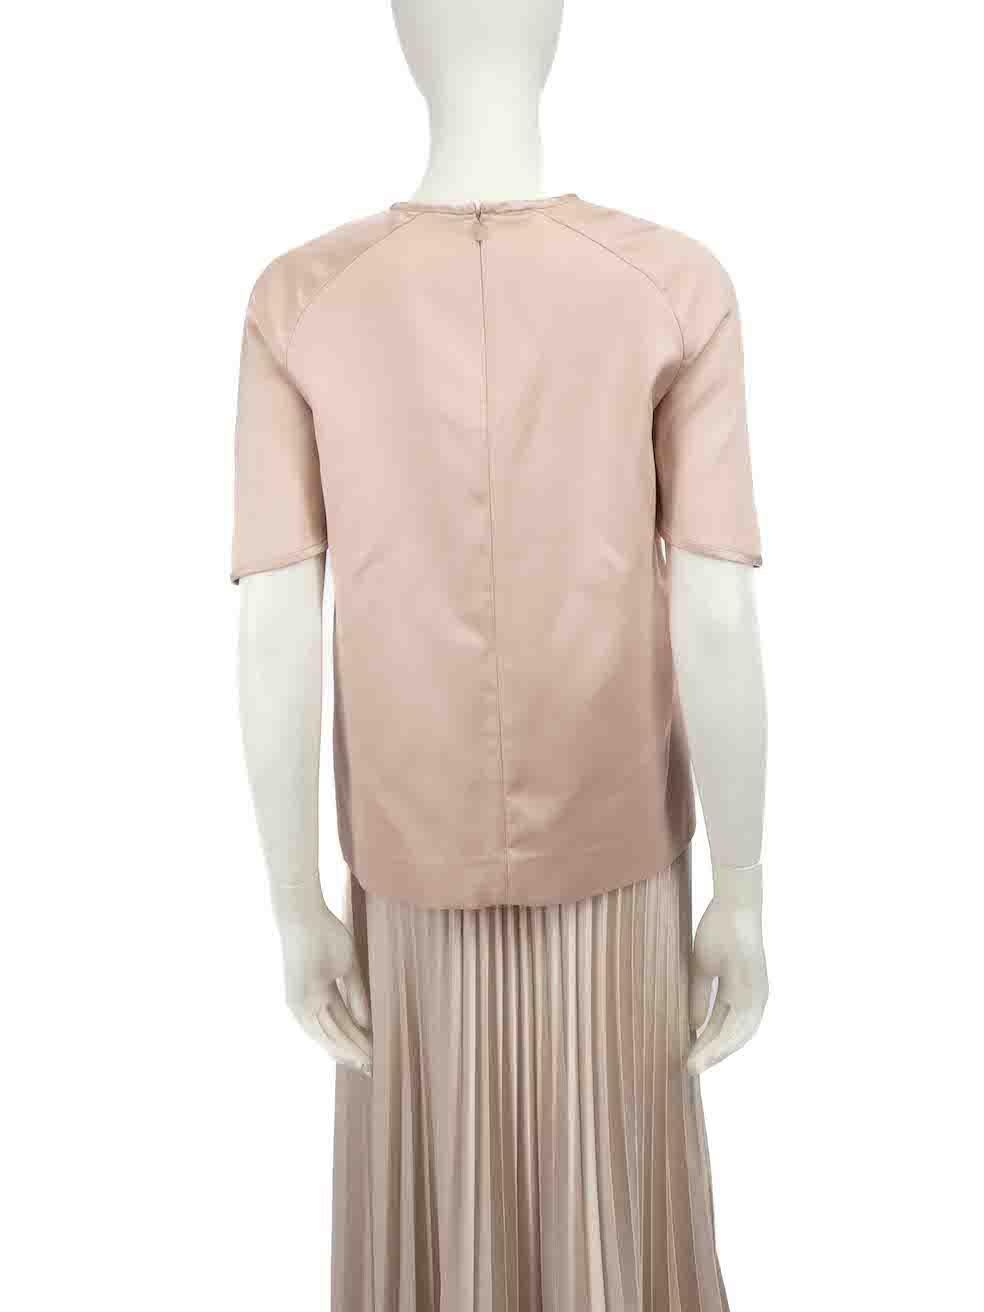 Chloé Dusty Pink Wool Short Sleeve Top Size L In Excellent Condition For Sale In London, GB